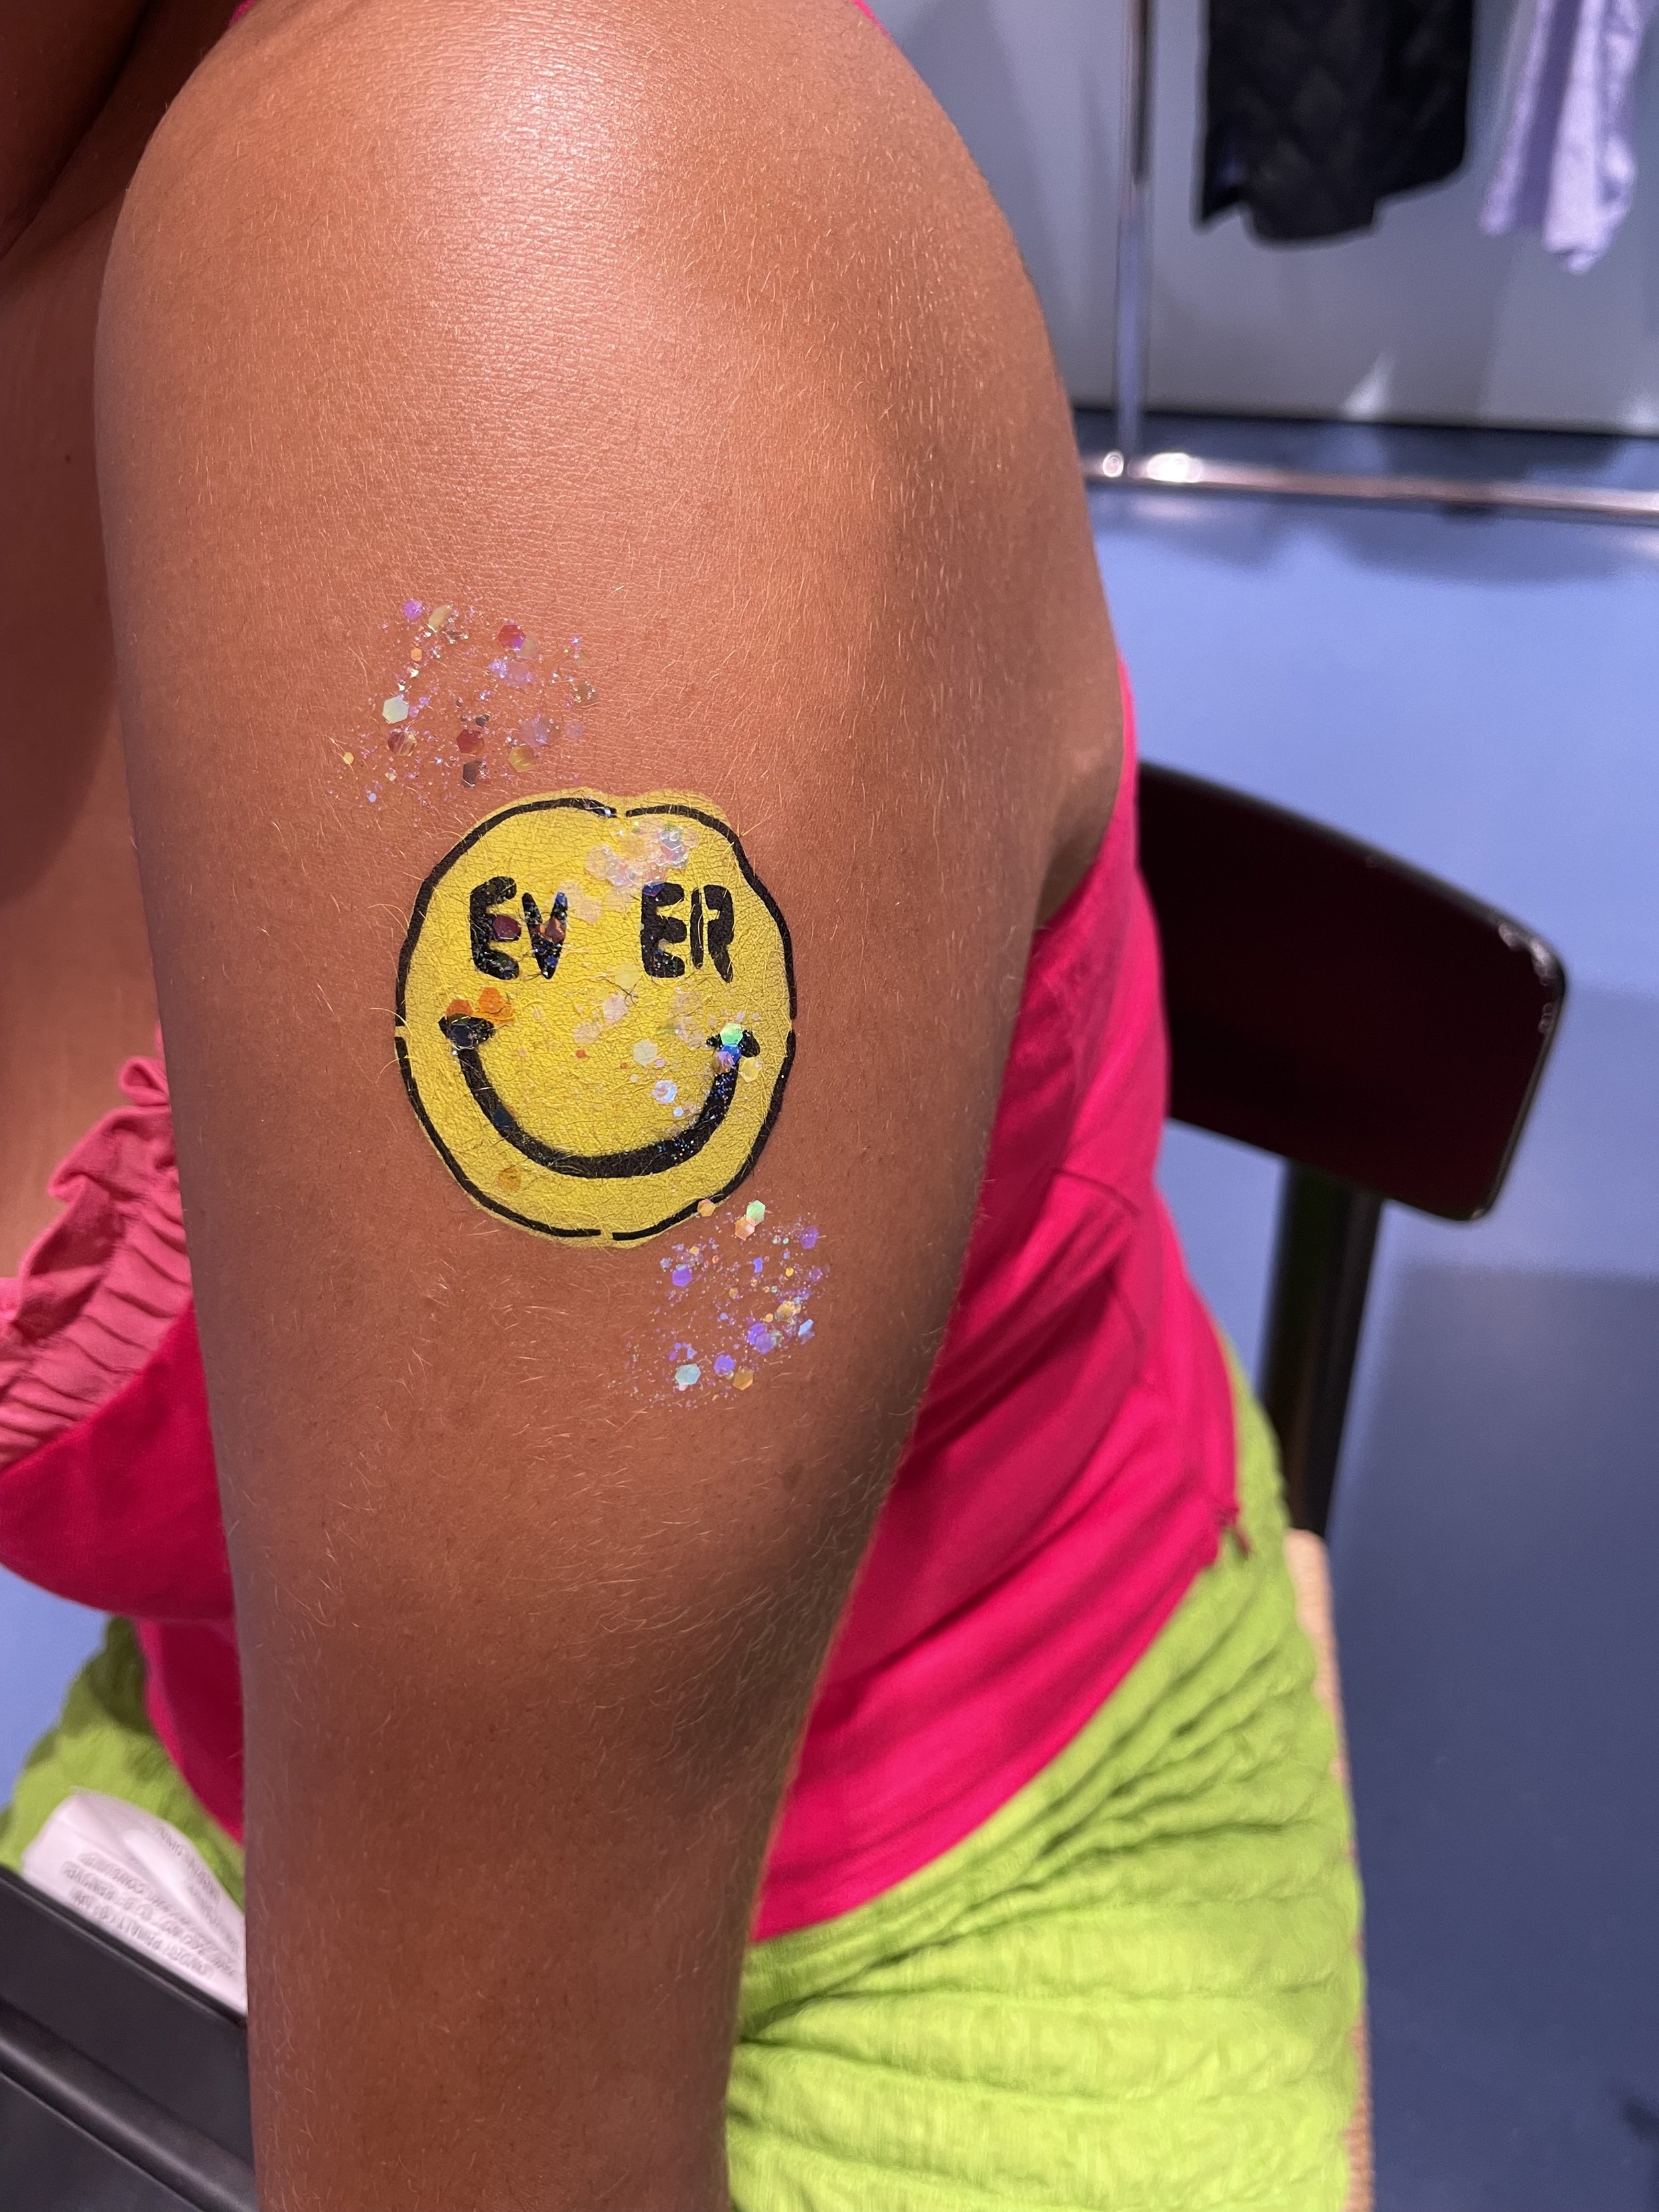 GANNI Airbrush Tattoos for Event Party New York City.jpg